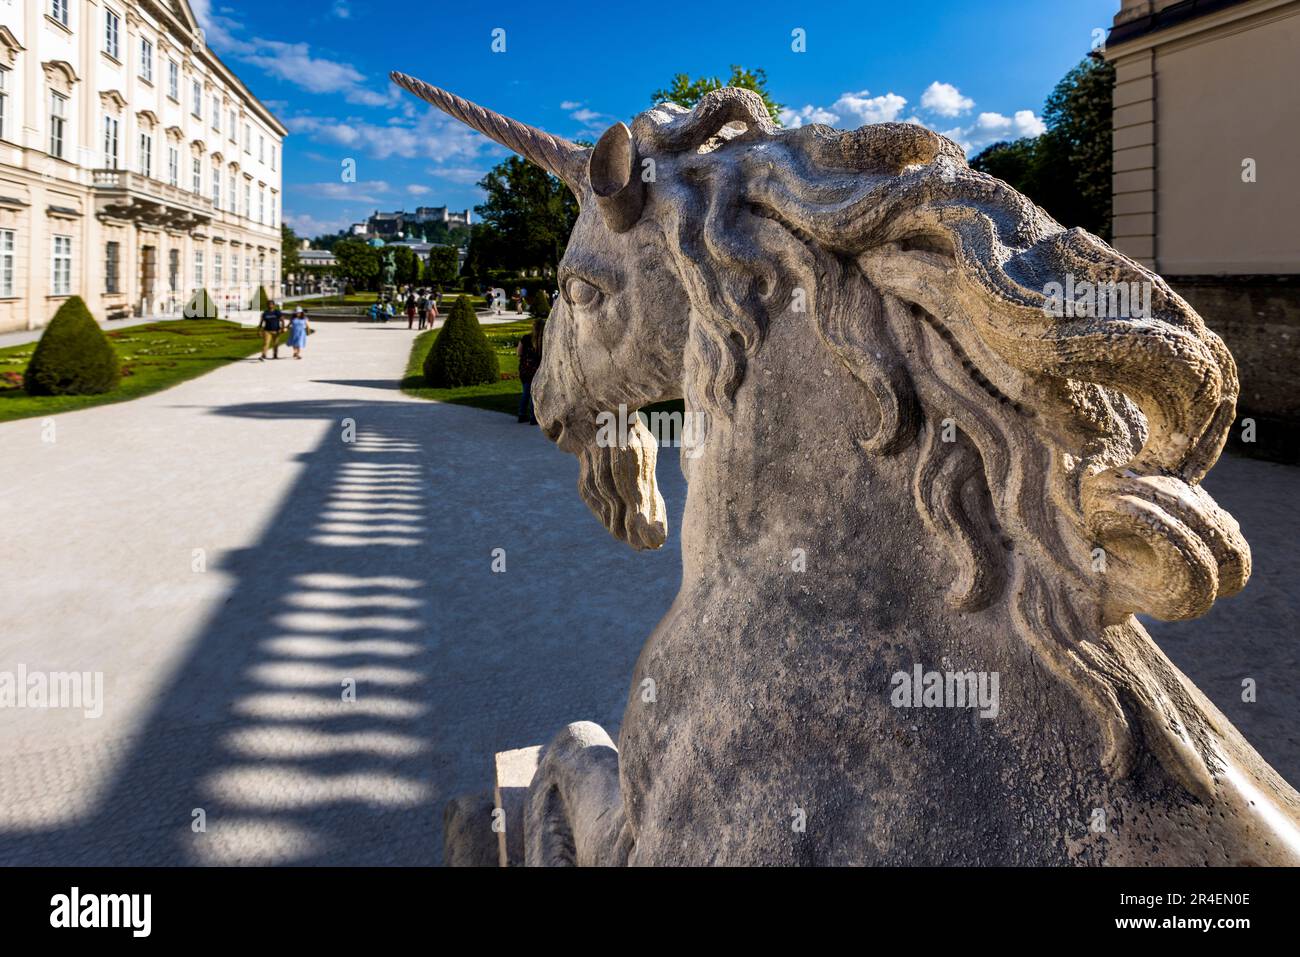 Mirabell Palace is located in a park known with 'Do-Re-Mi' and many unicorns from the movie Sound of Music. Salzburg, Austria Stock Photo